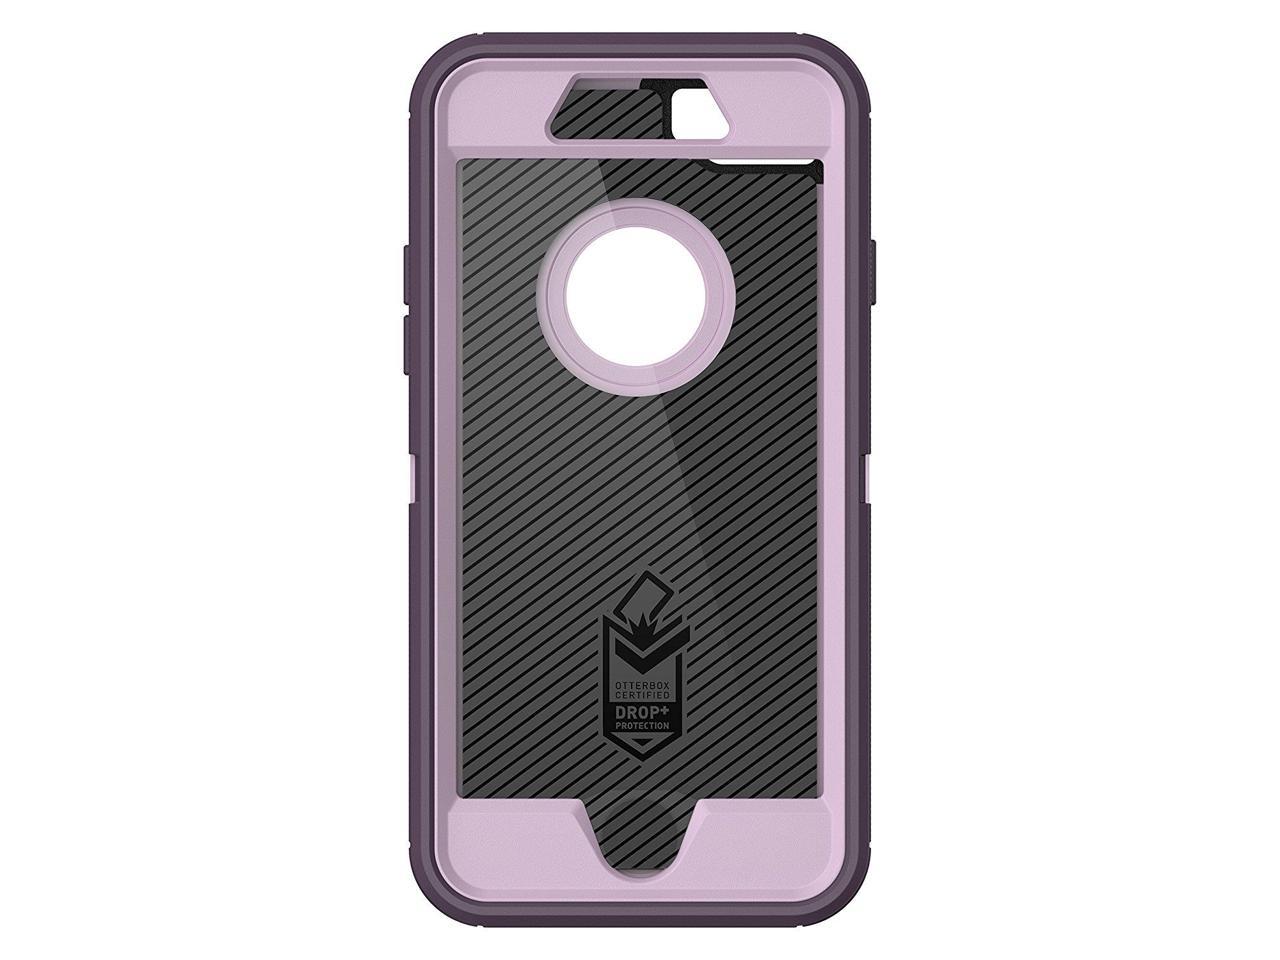 OtterBox DEFENDER SERIES Case for iPhone SE (3rd and 2nd gen) and iPhone 8/7 - Retail Packaging - image 3 of 19